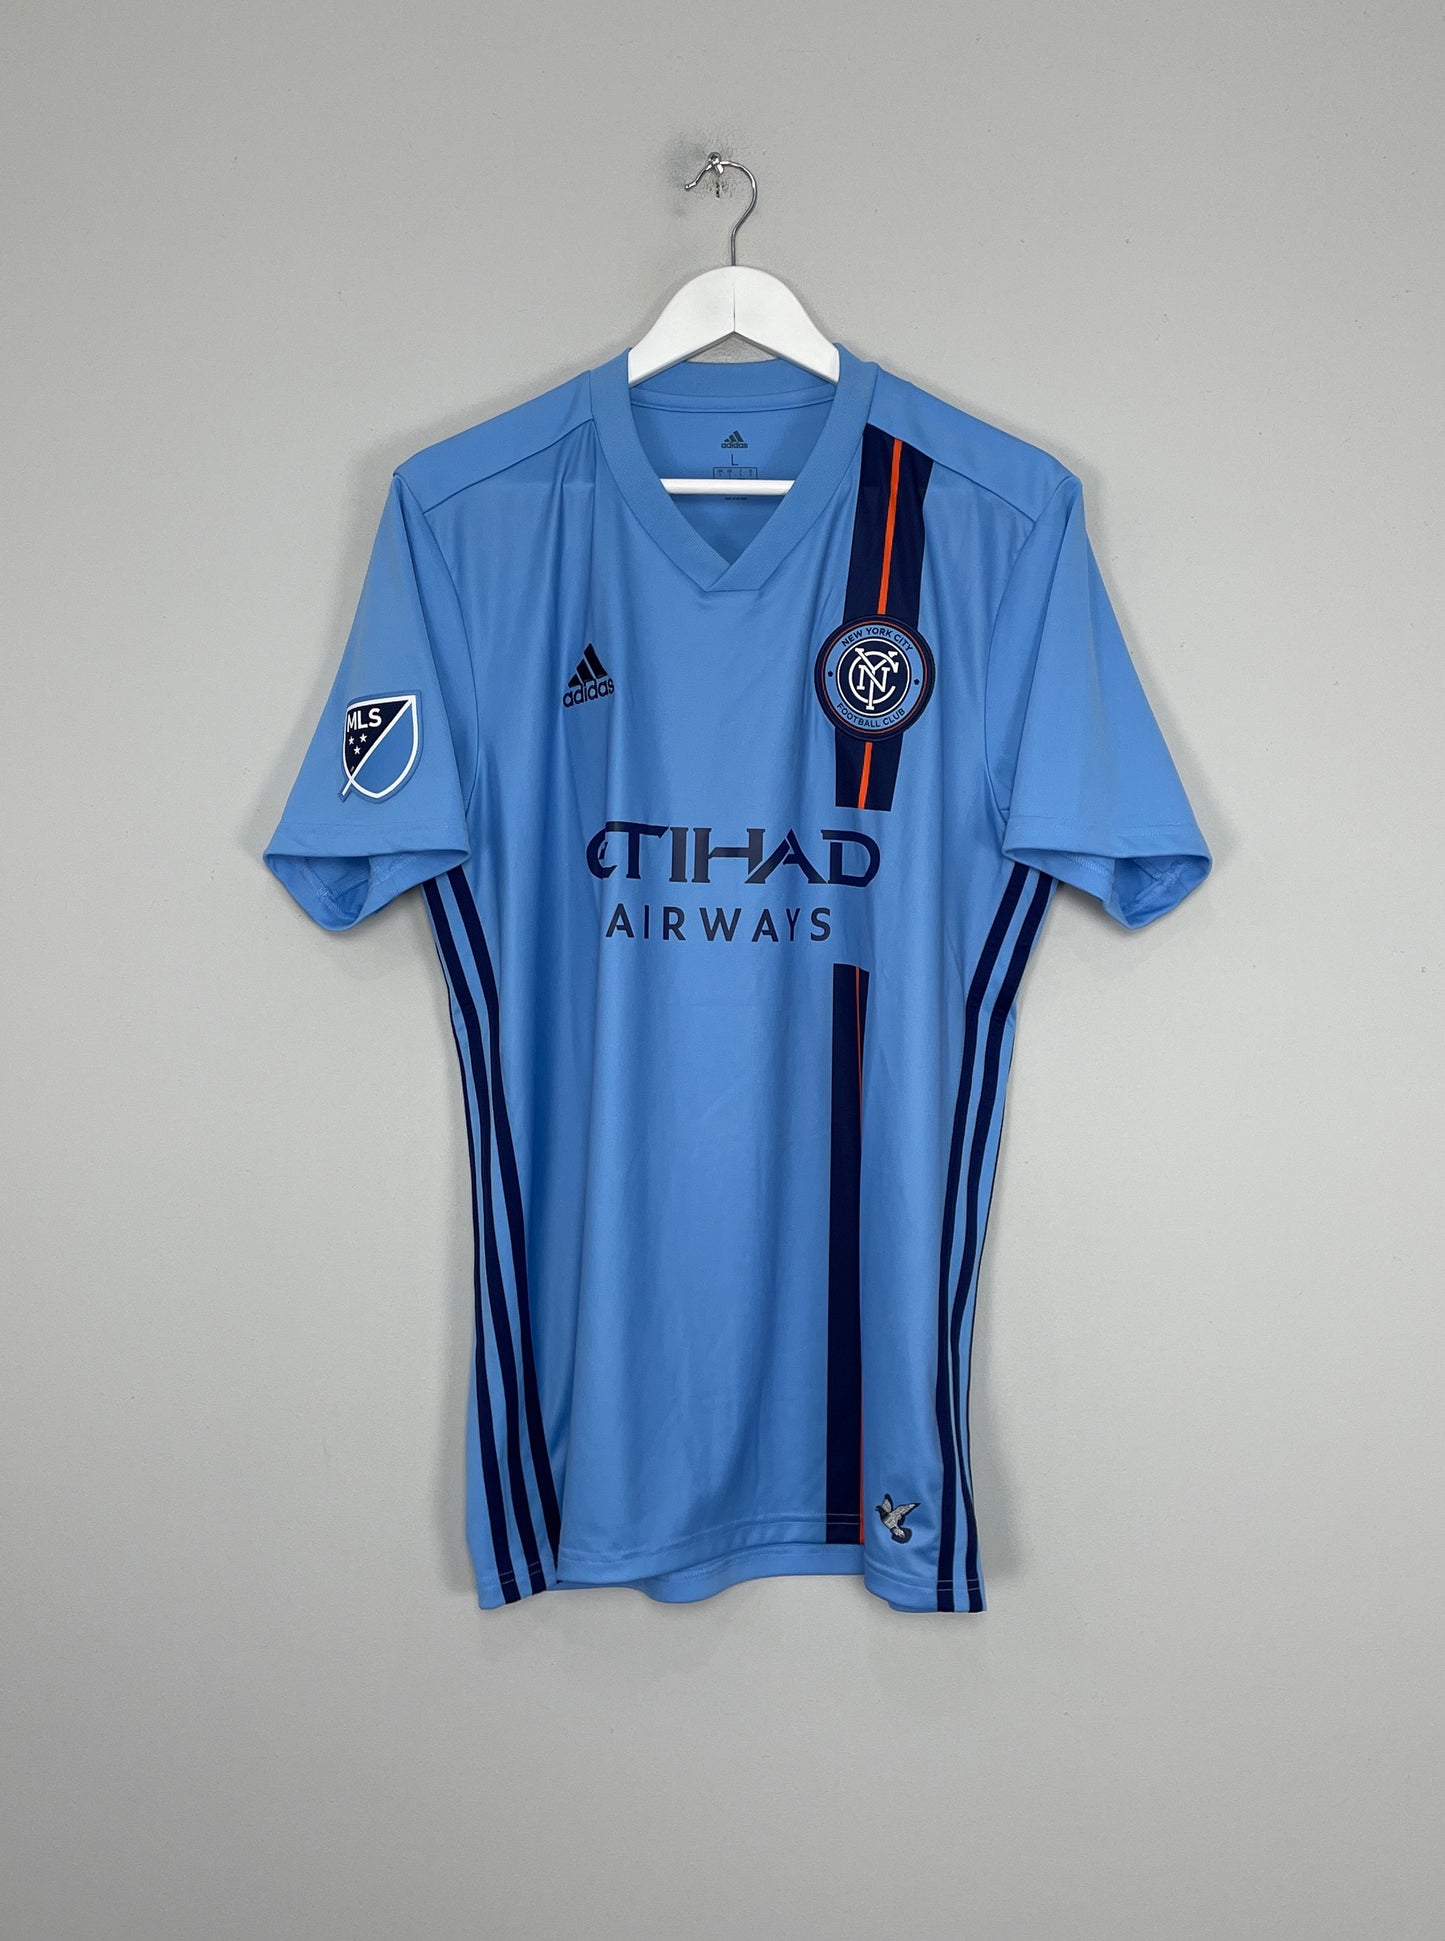 Image of the New York City shirt from the 2019/20 season